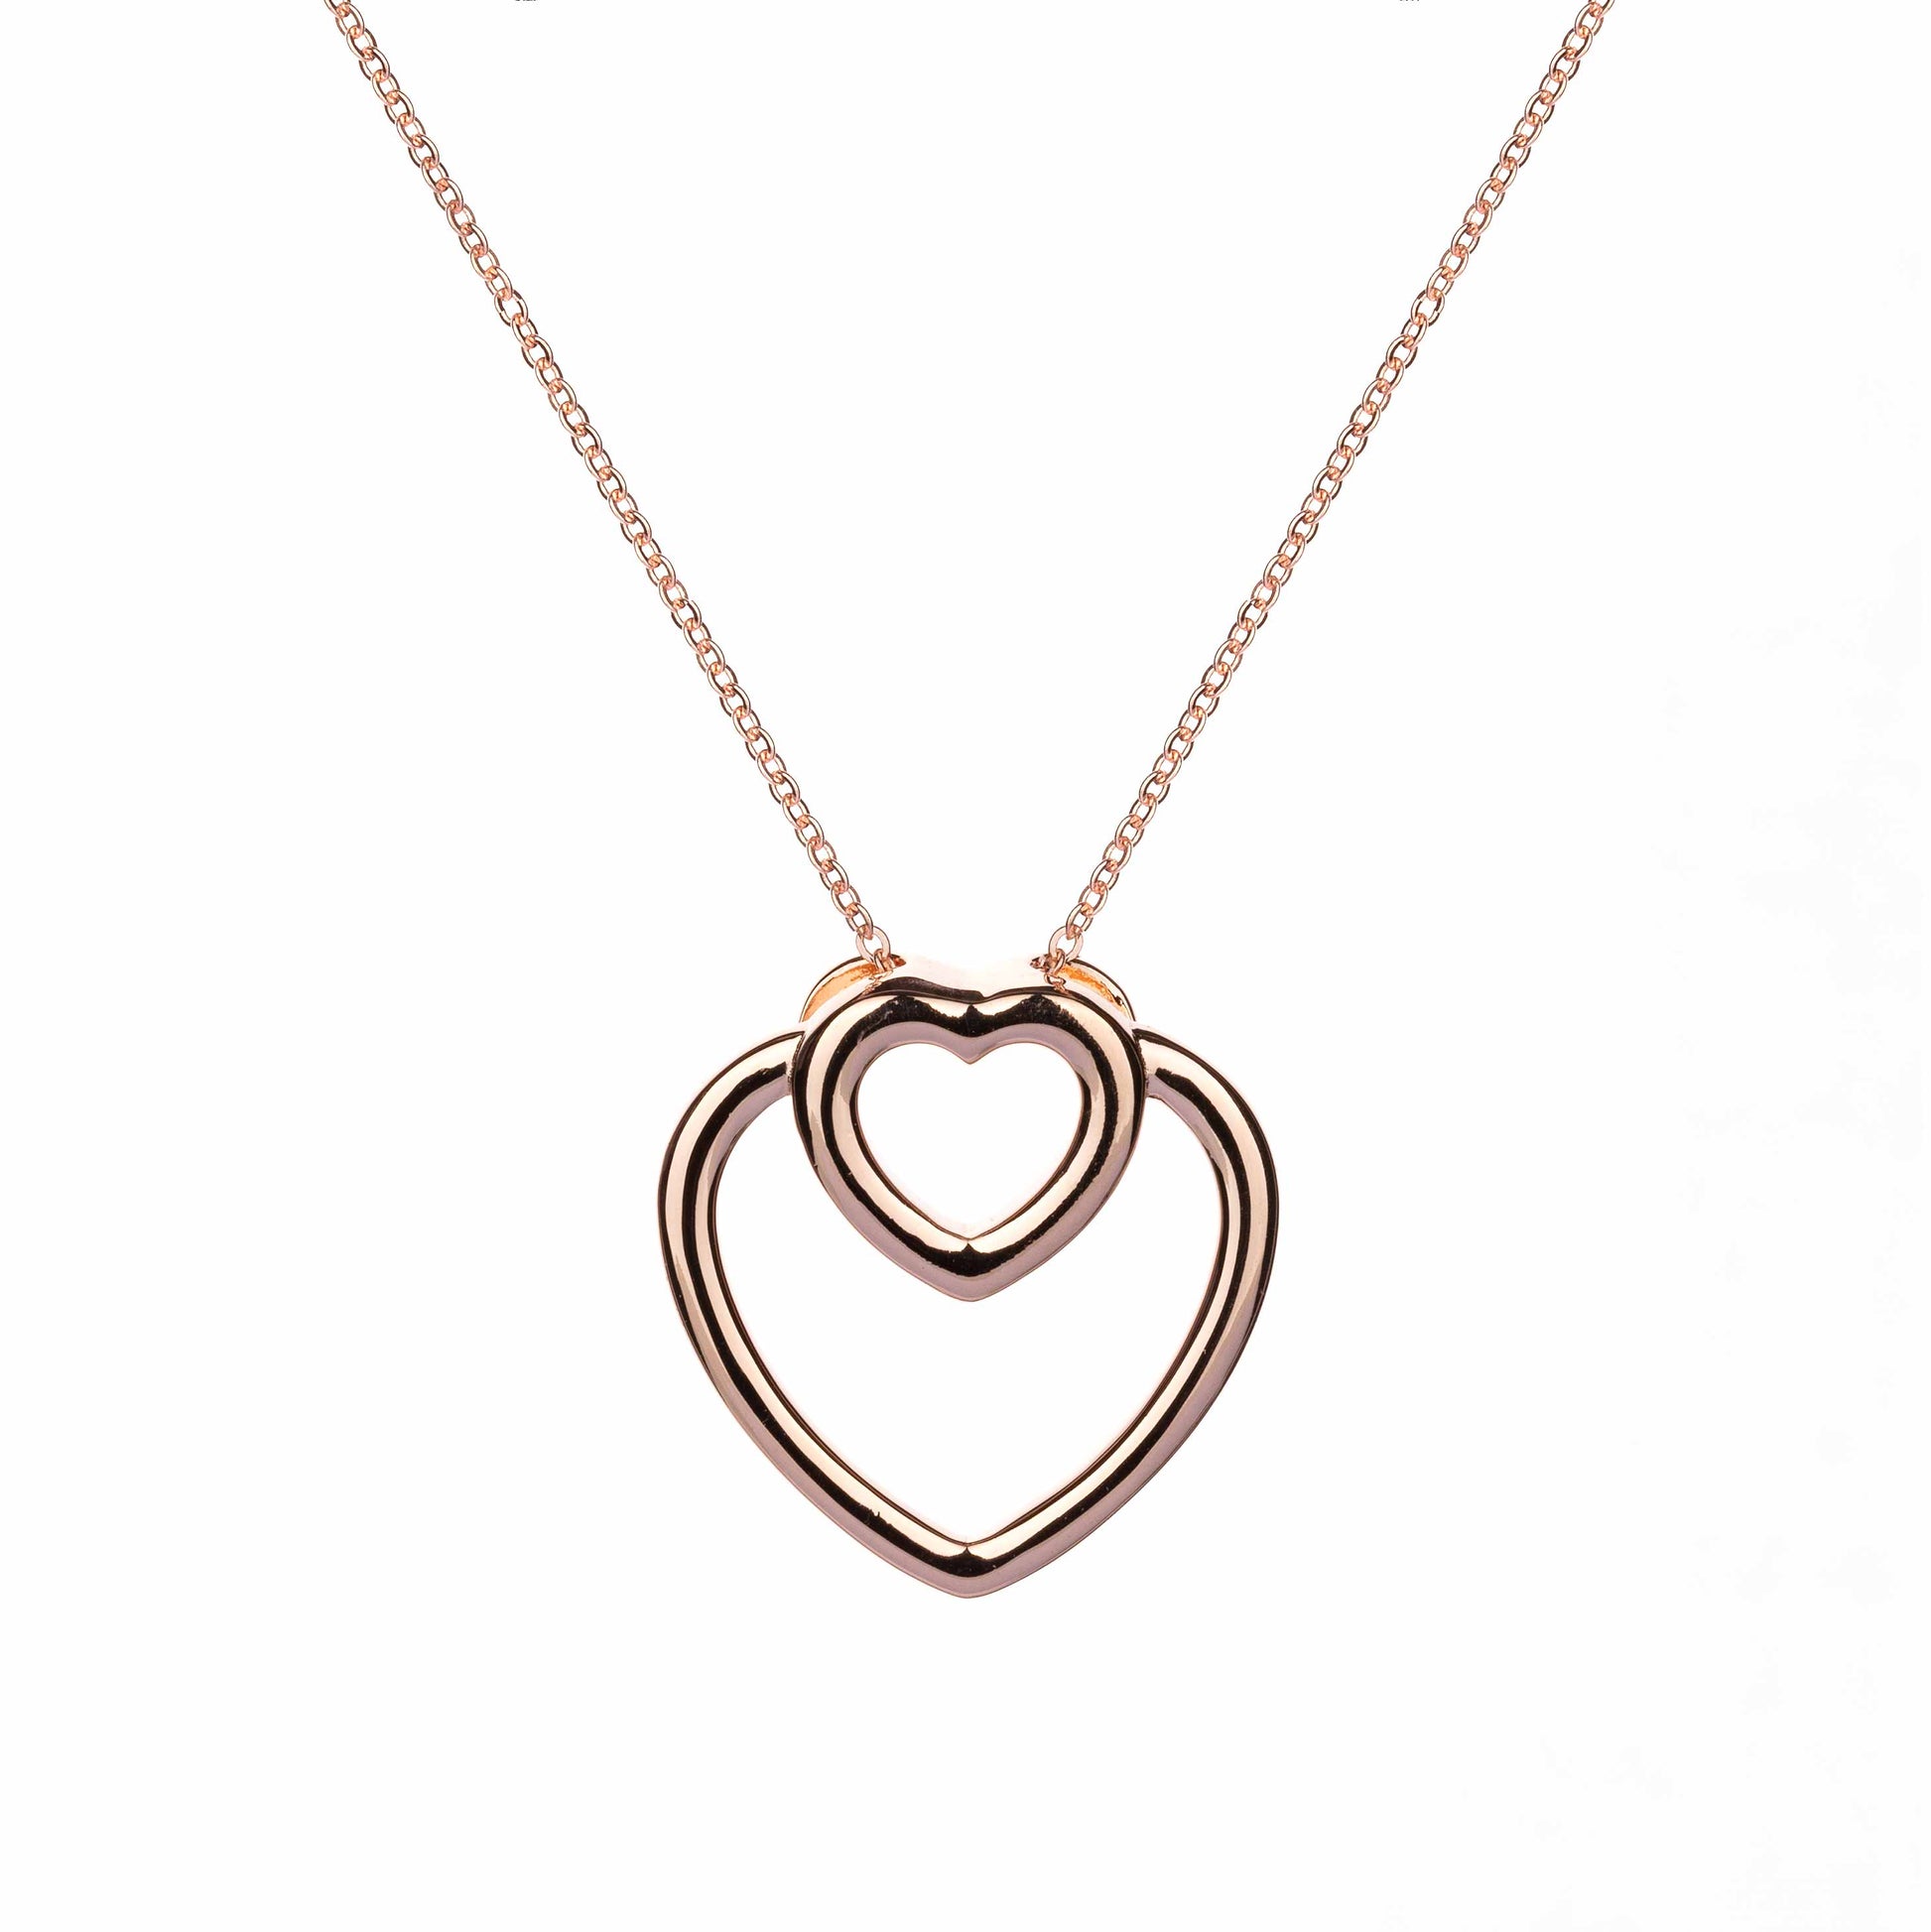 With Love - Dual Hearts - Necklace